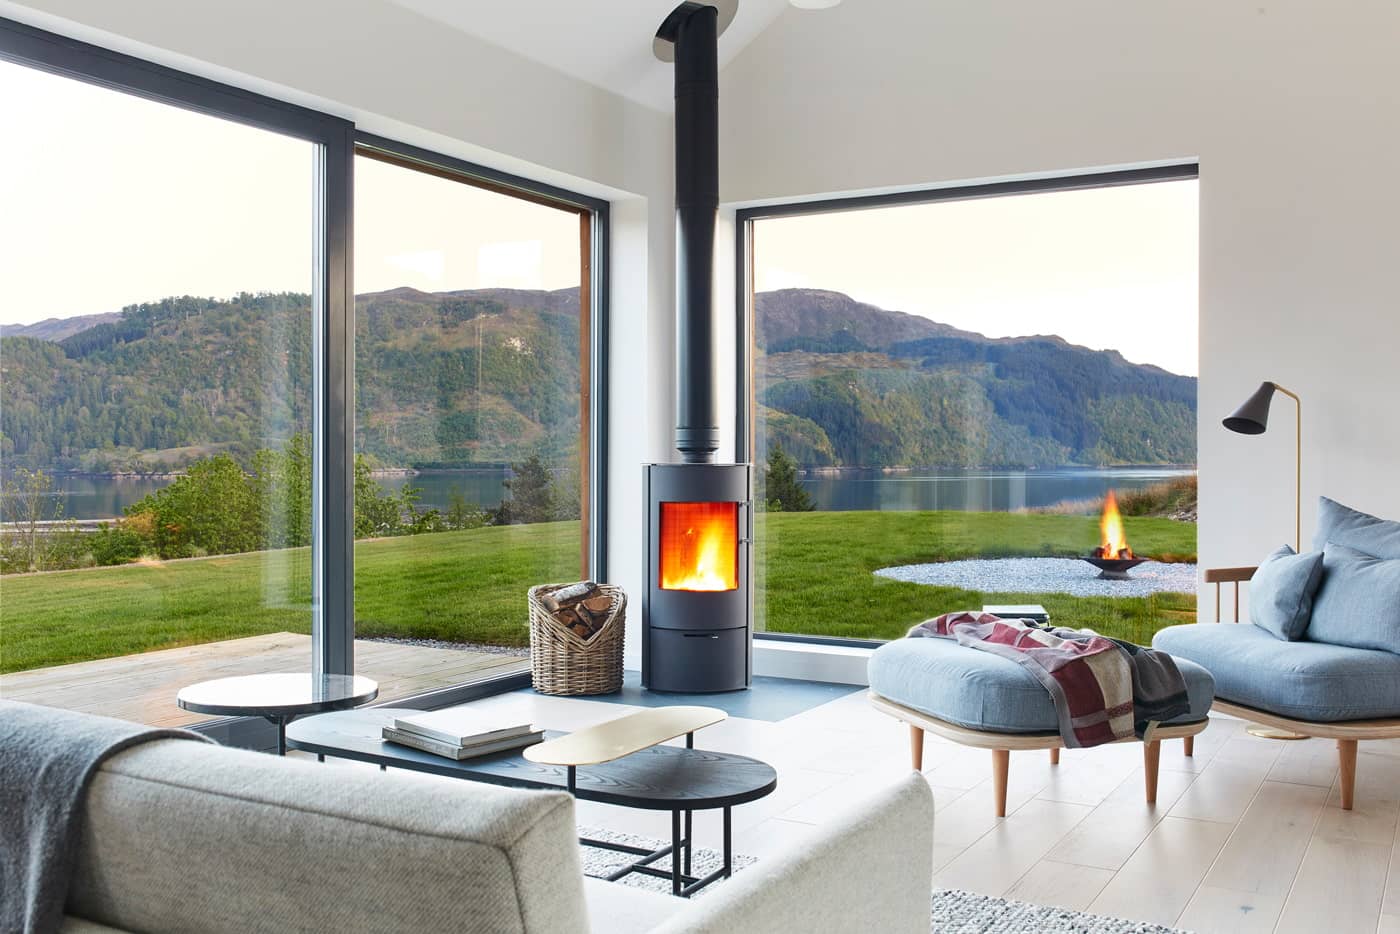 Boutique self-catering holiday home in the Northwest Highlands